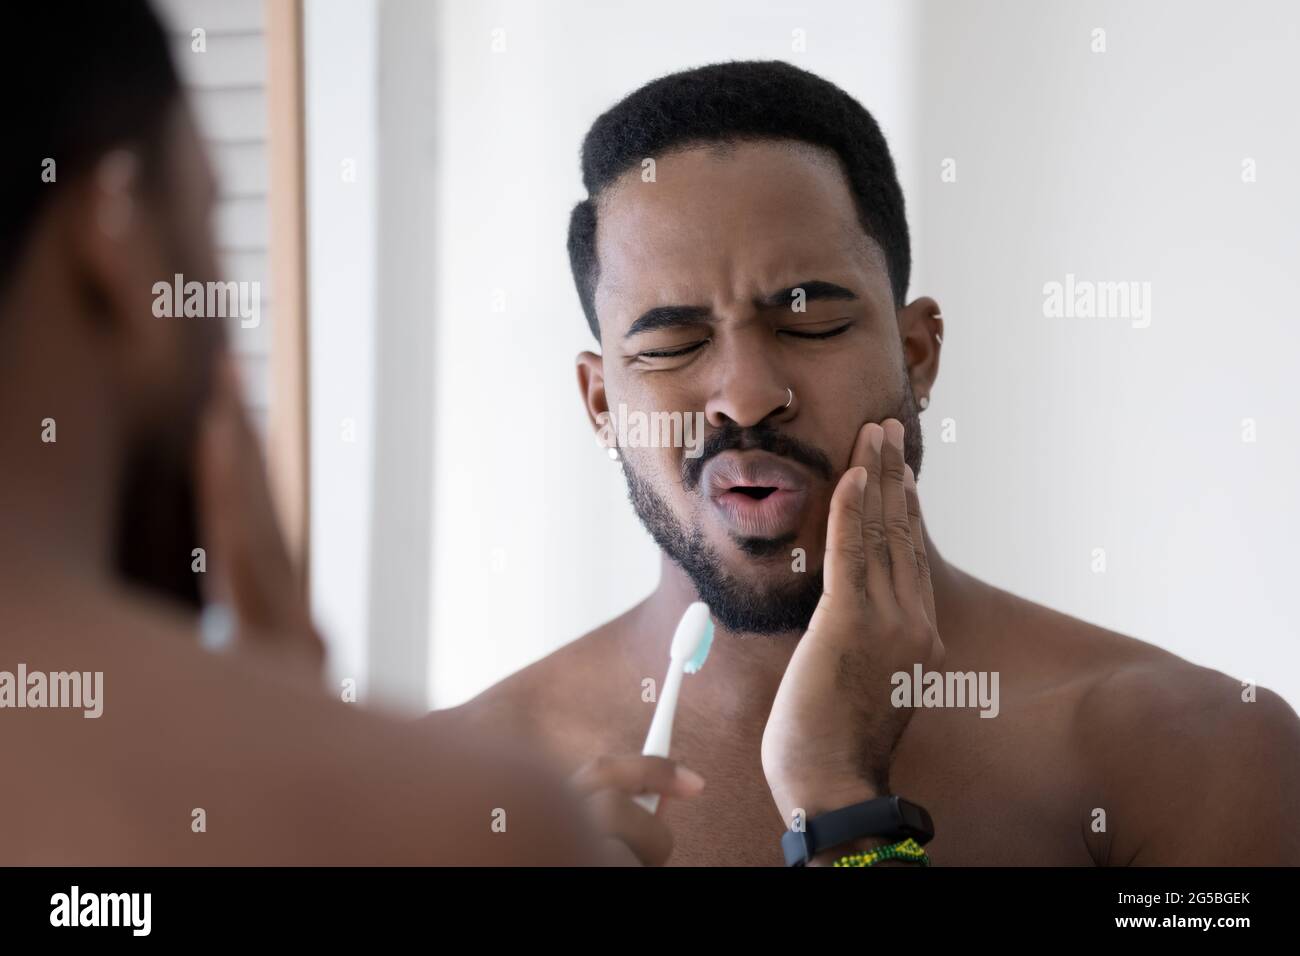 Stressed upset mixed raced Black man feeling pain and discomfort Stock Photo